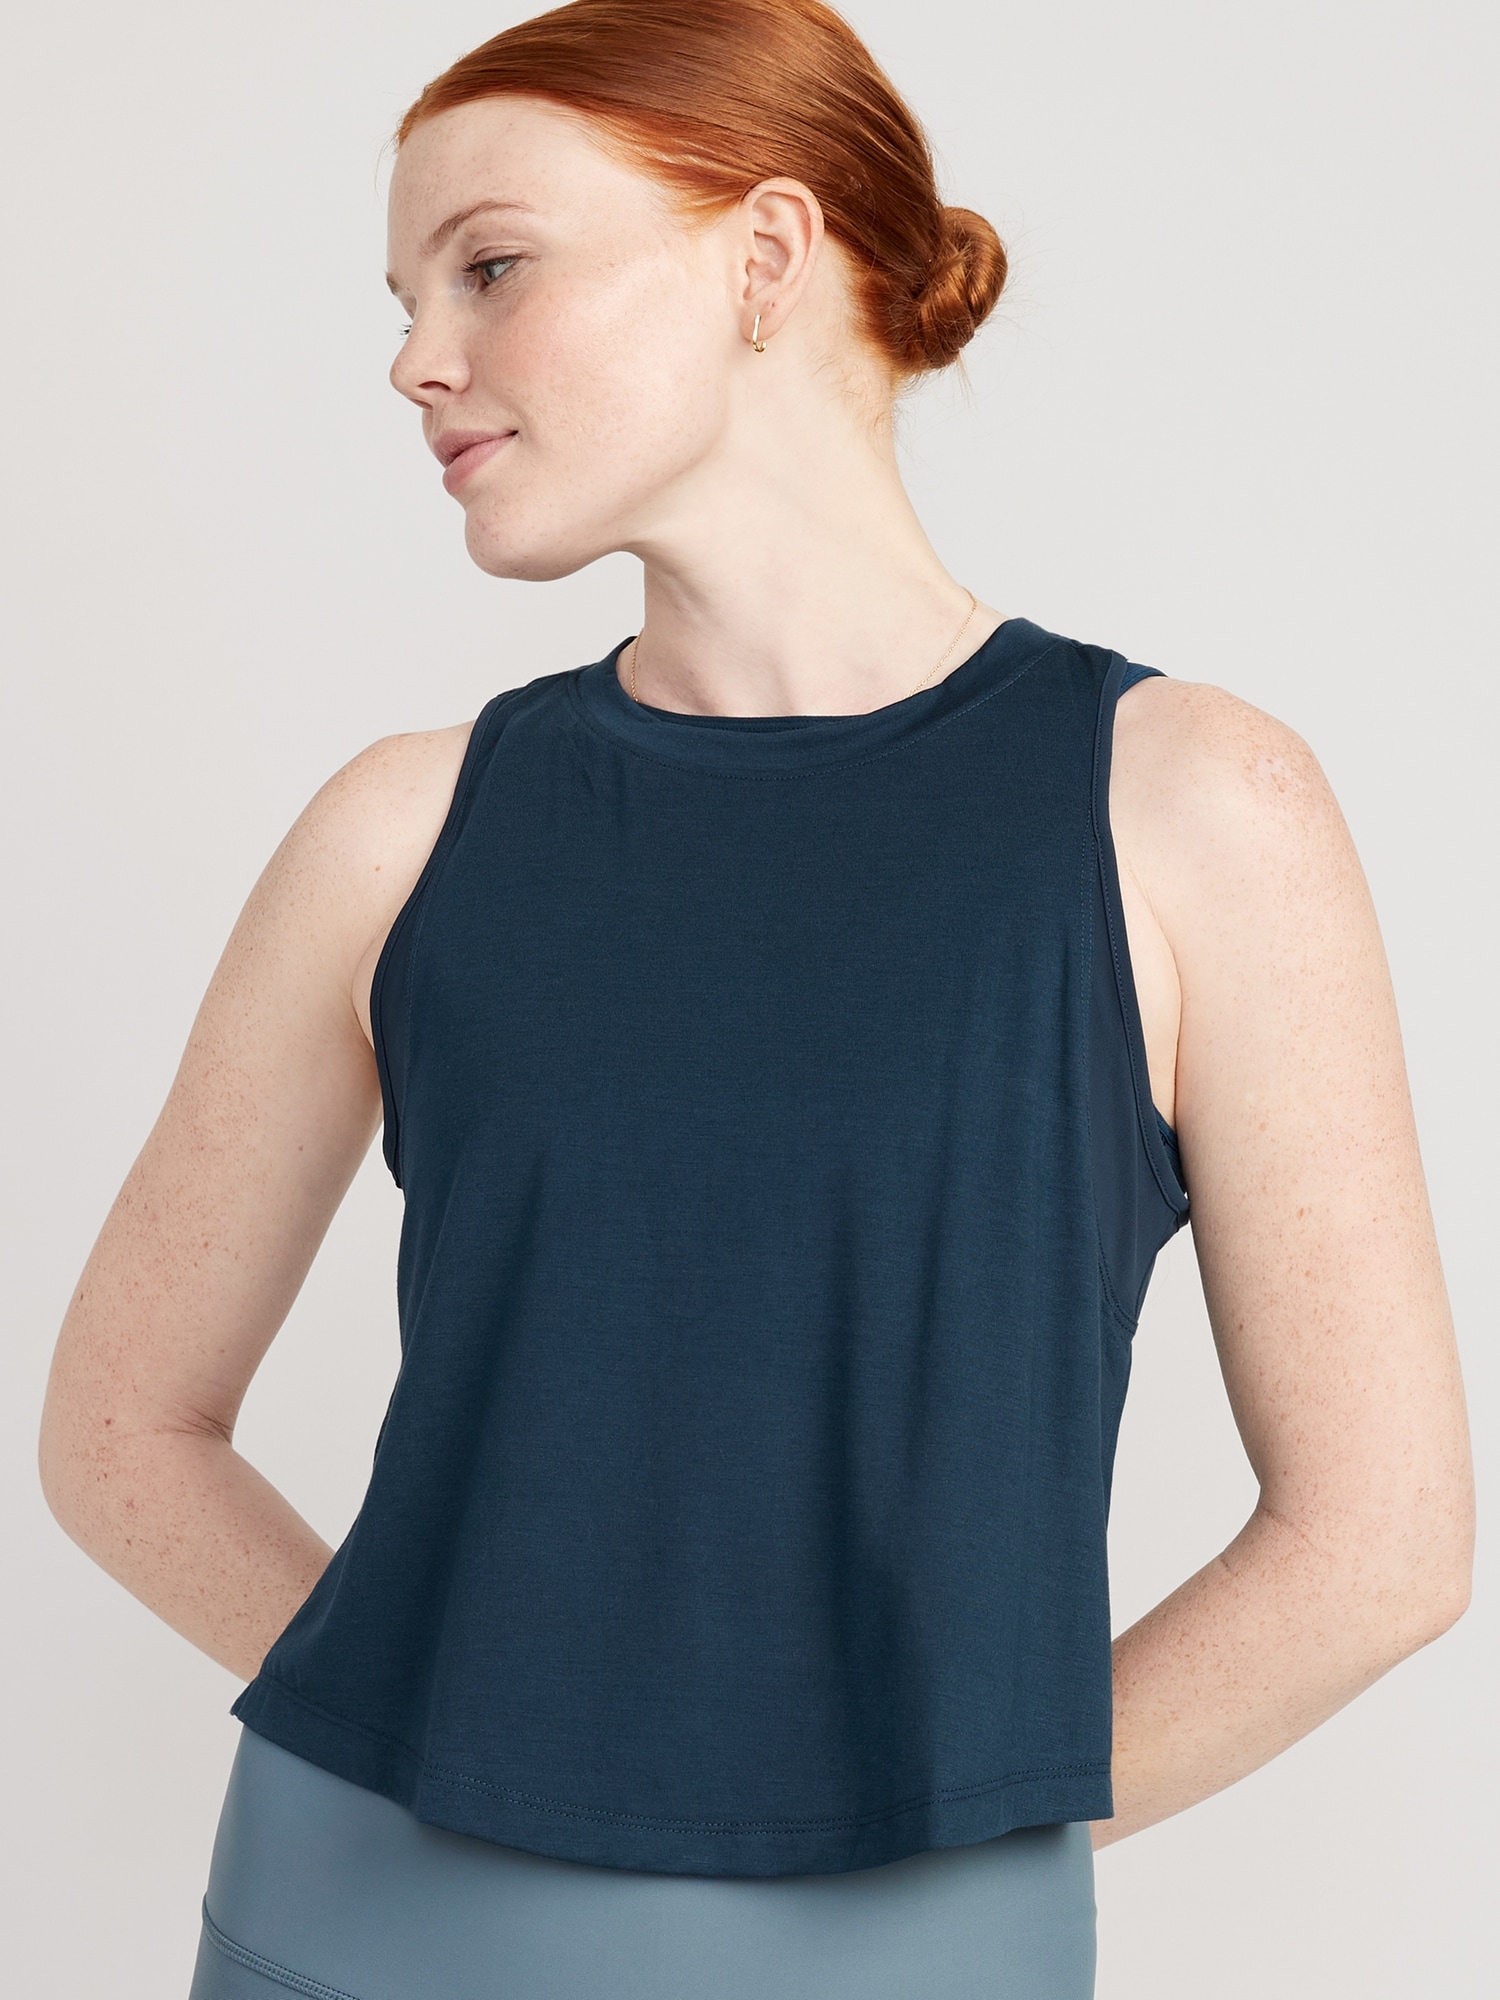 Old Navy UltraLite All-Day Sleeveless Cropped Top for Women blue. 1